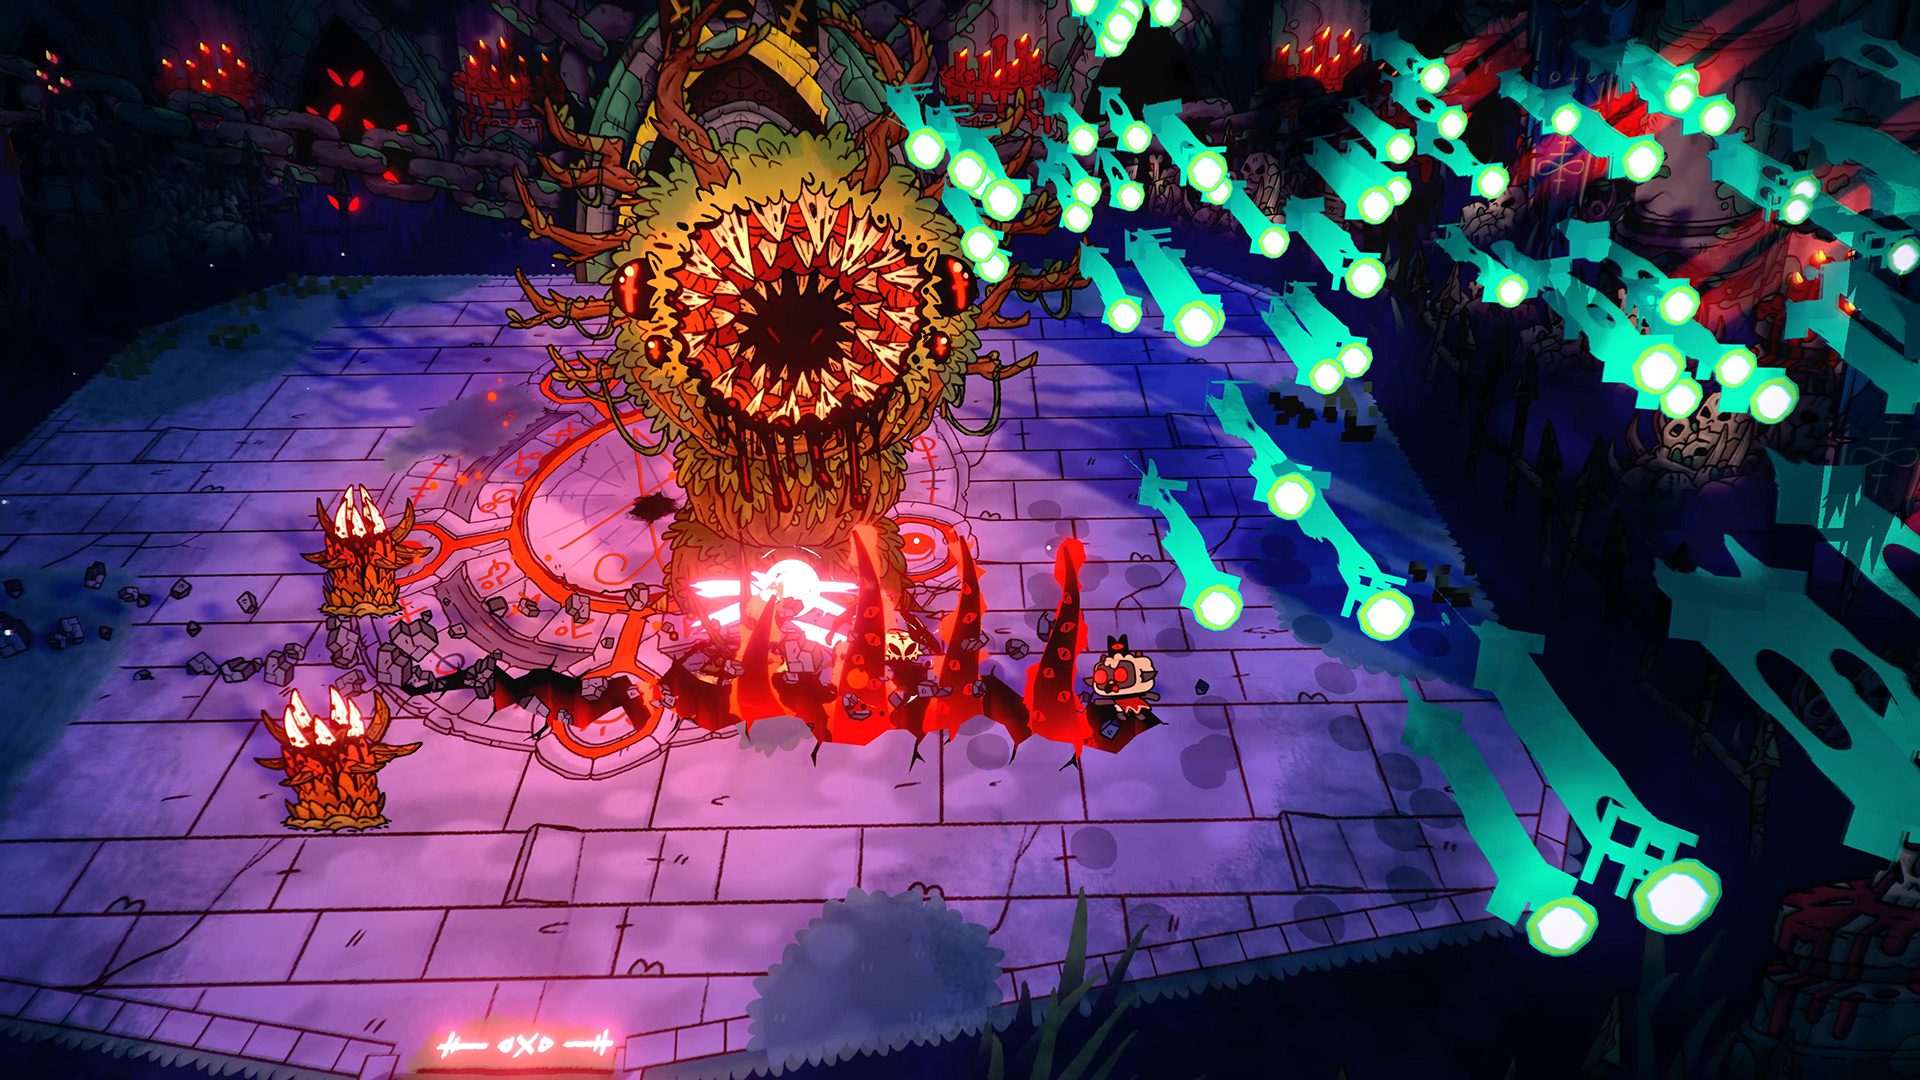 Fighty a many-toothed boss in Cult of the Lamb